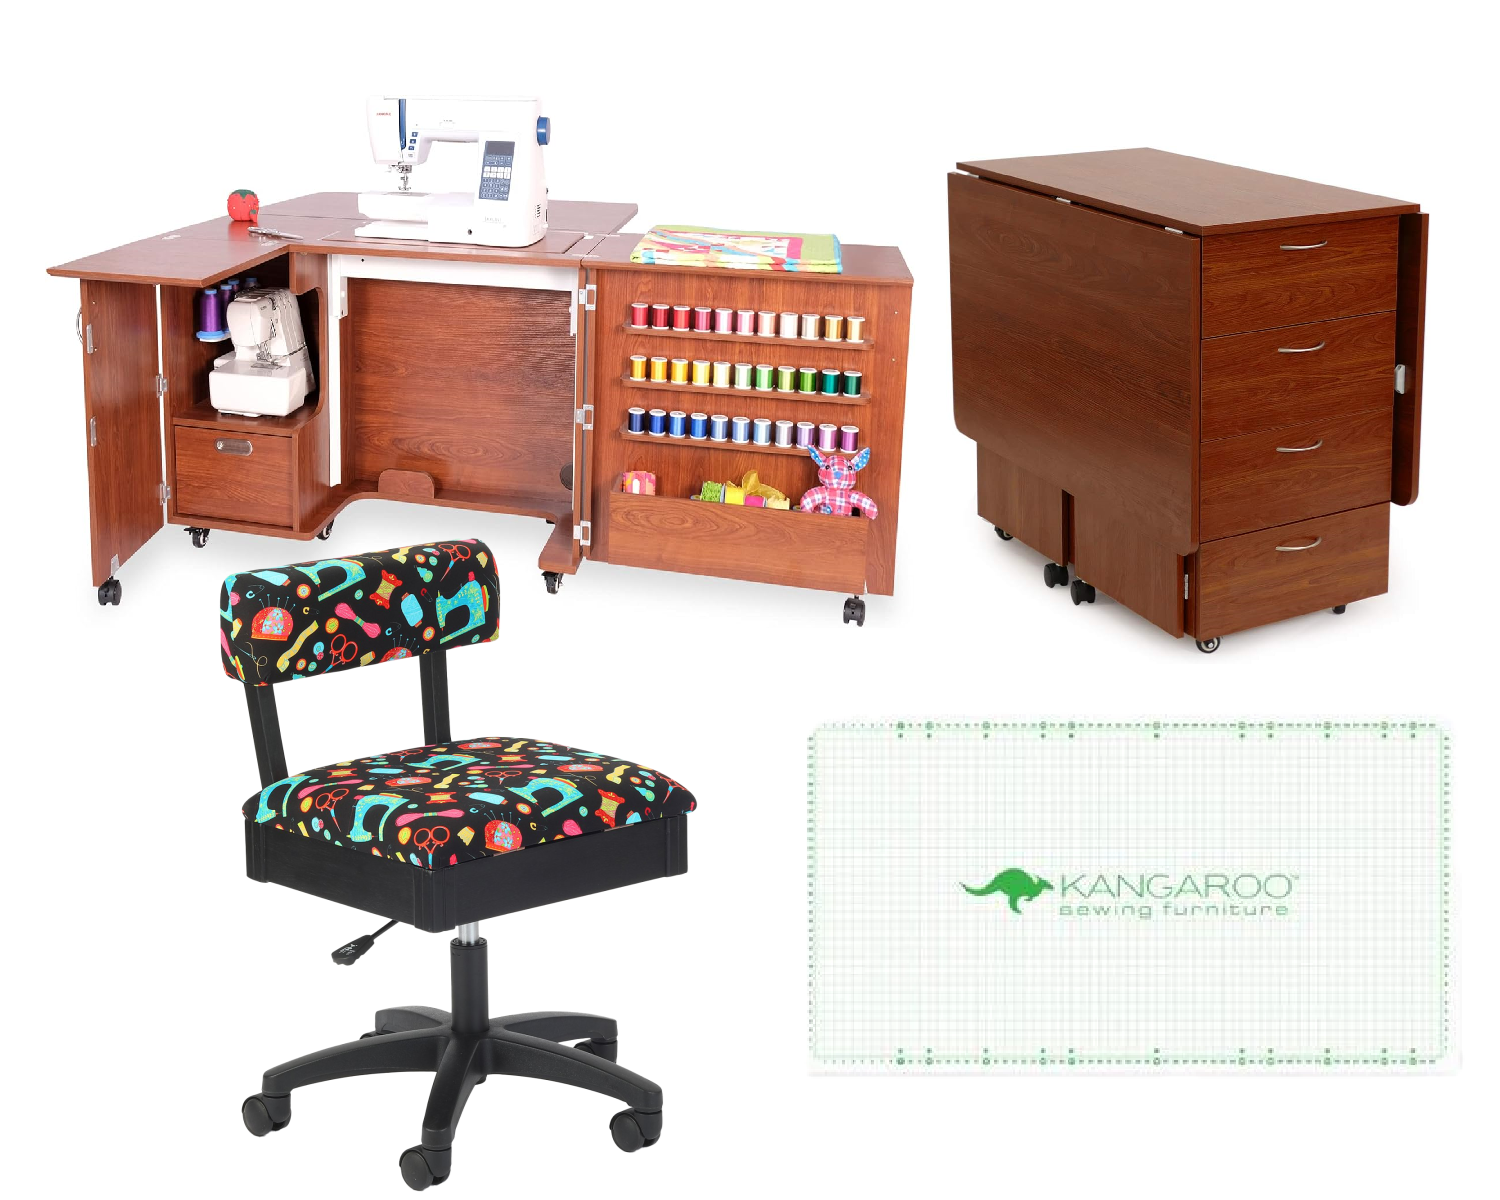 Arrow Sewing Wallaby + Kookaburra Sewing and Crafting Furniture Bundle for Sale at World Weidner